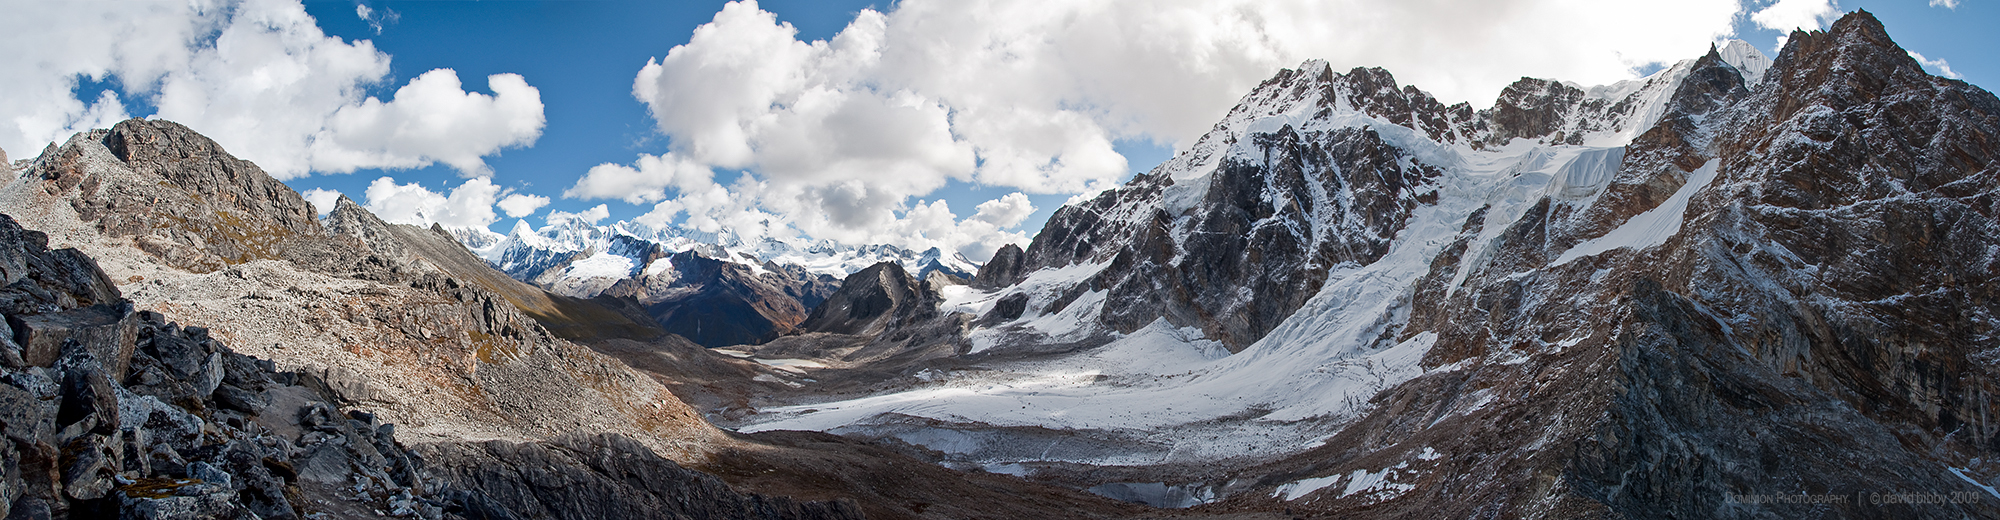   Karchung La  - View from the pass (5120m), surrounded by 7000m+ peaks. Snowman trek. 